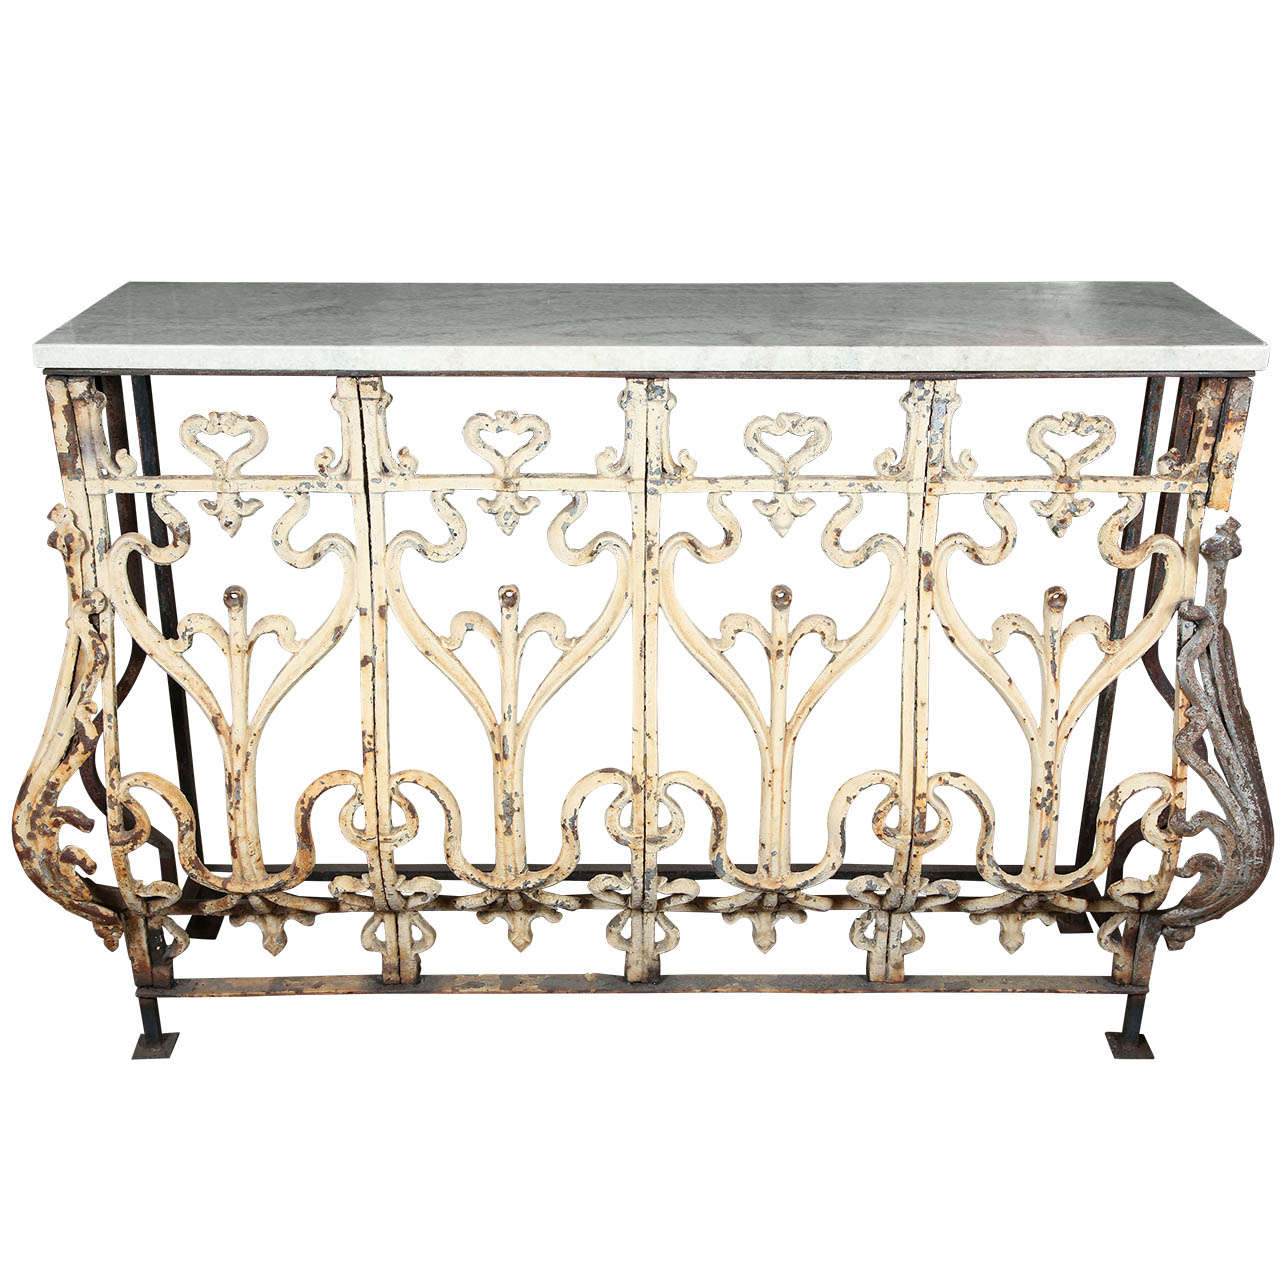 Console Table made from an Argentinean Balcony with Marble Top